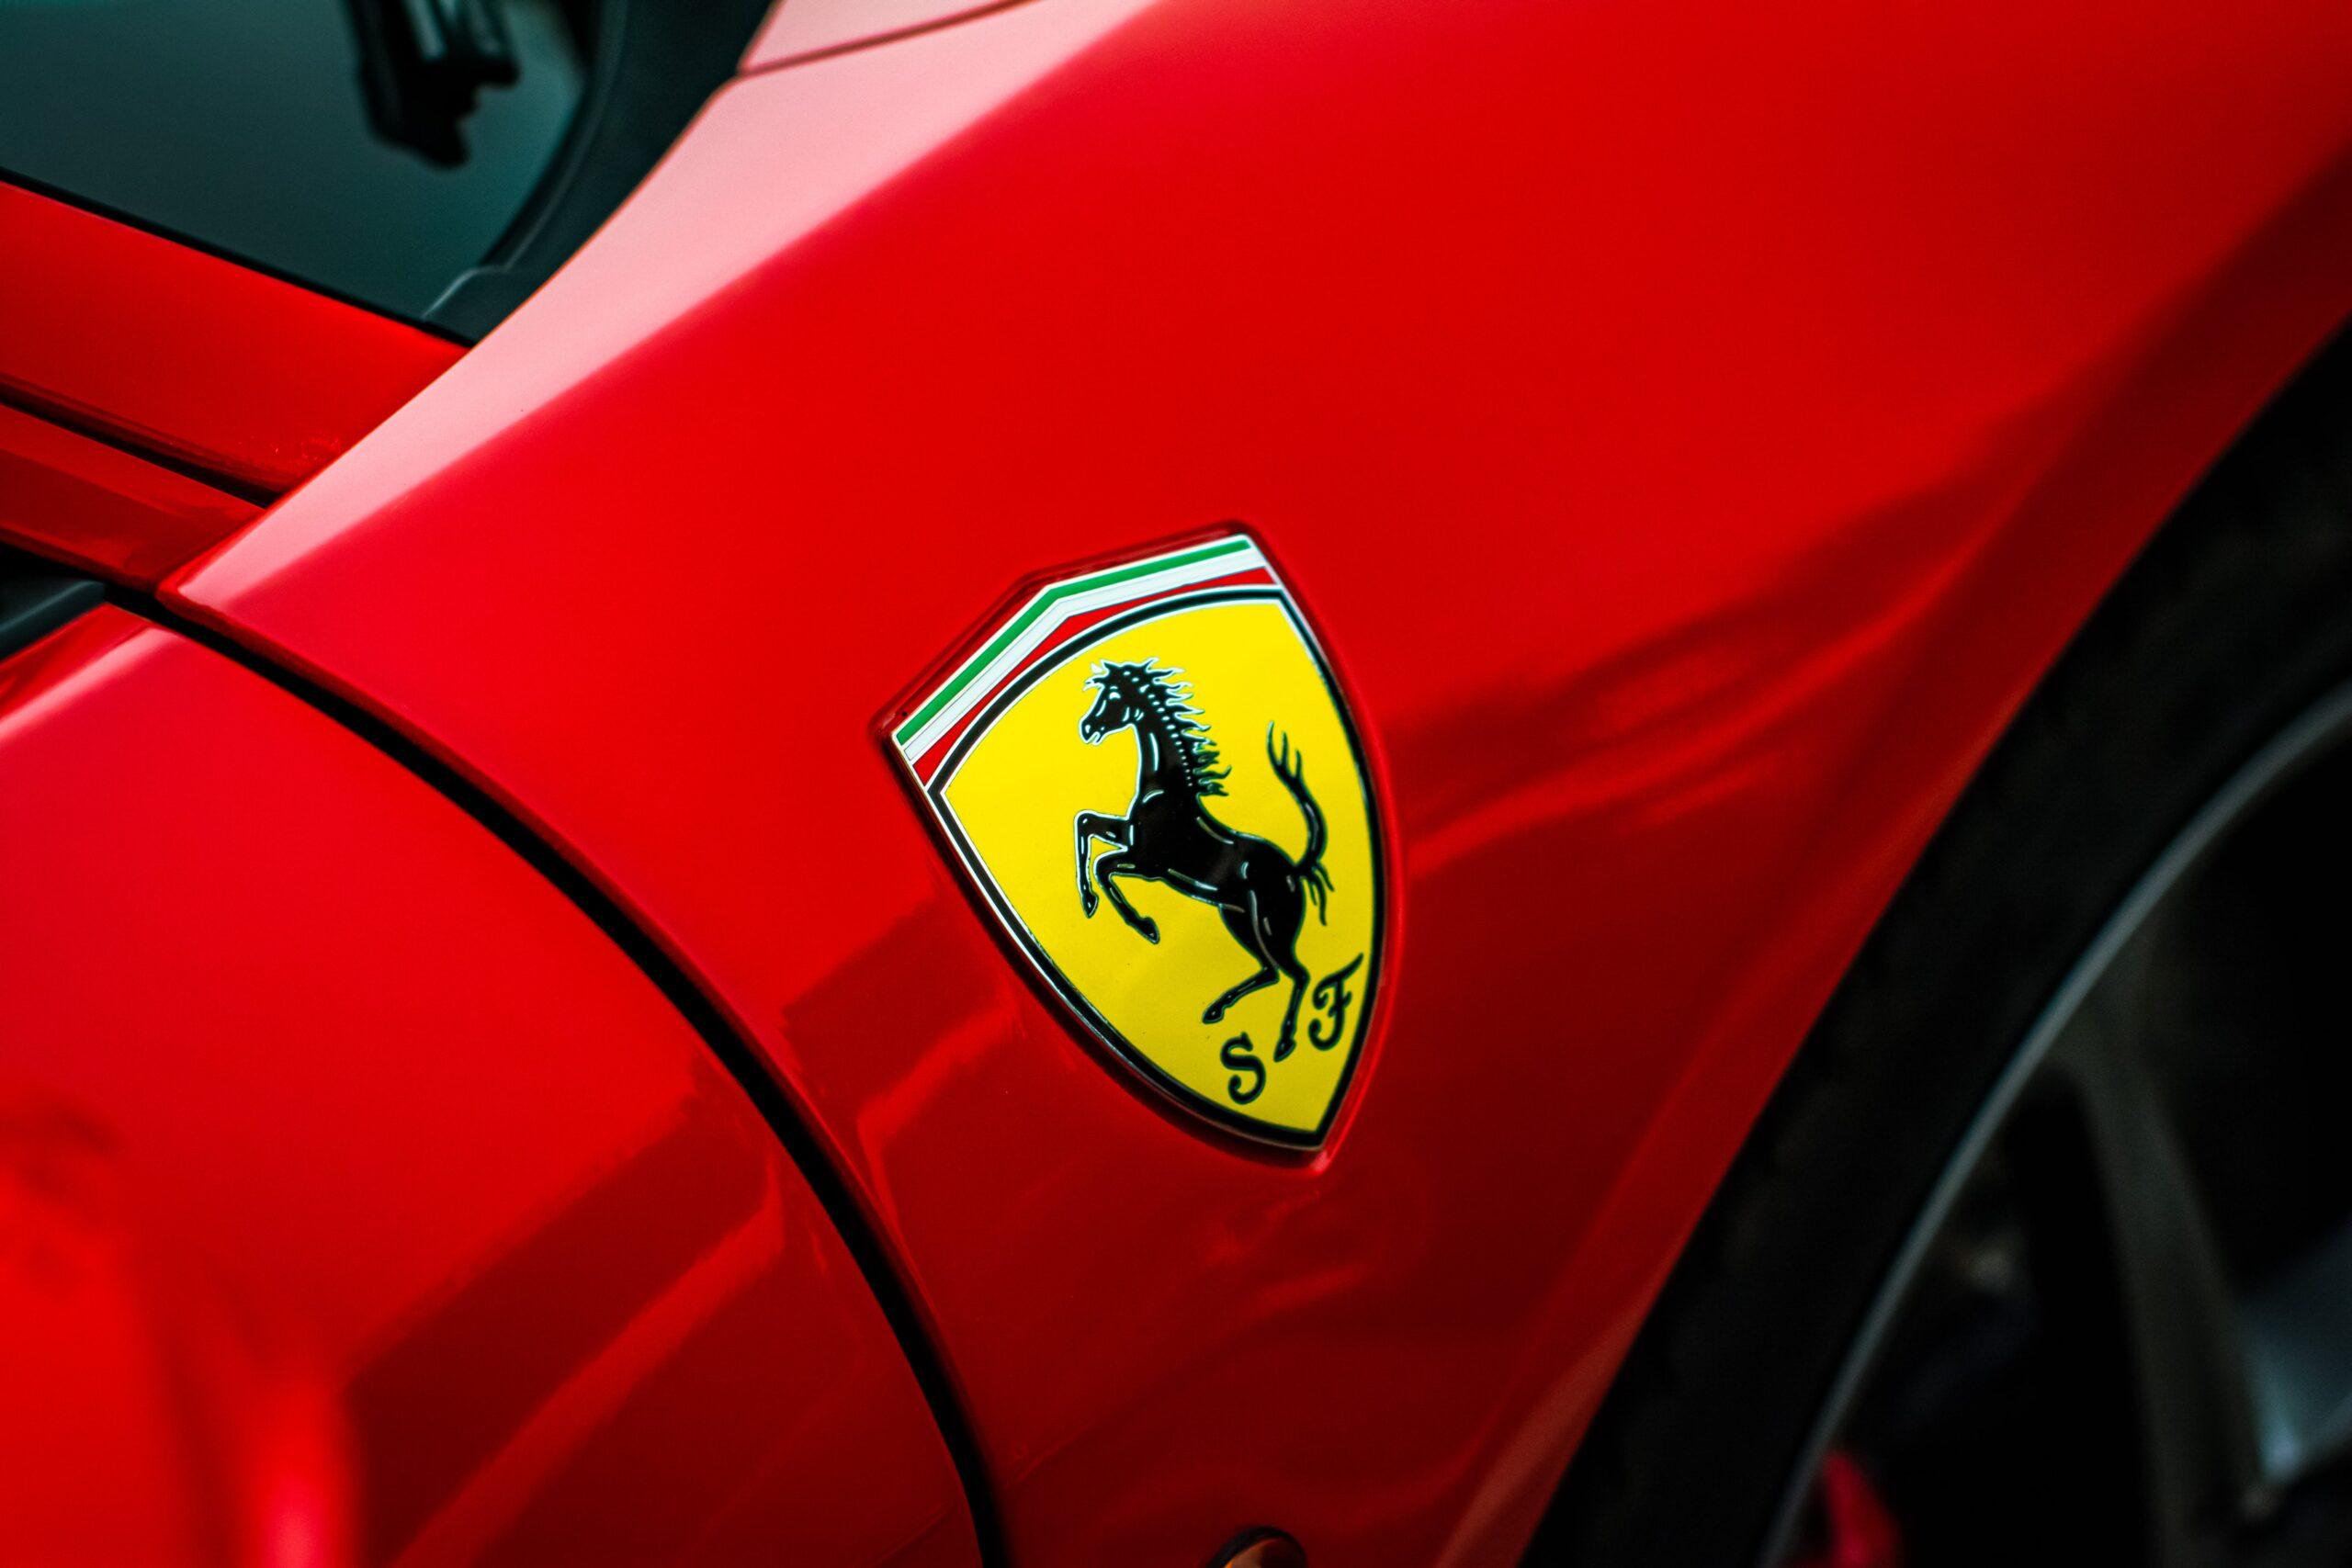 Rev your engines for a Ferrari Festival is coming to Jeddah